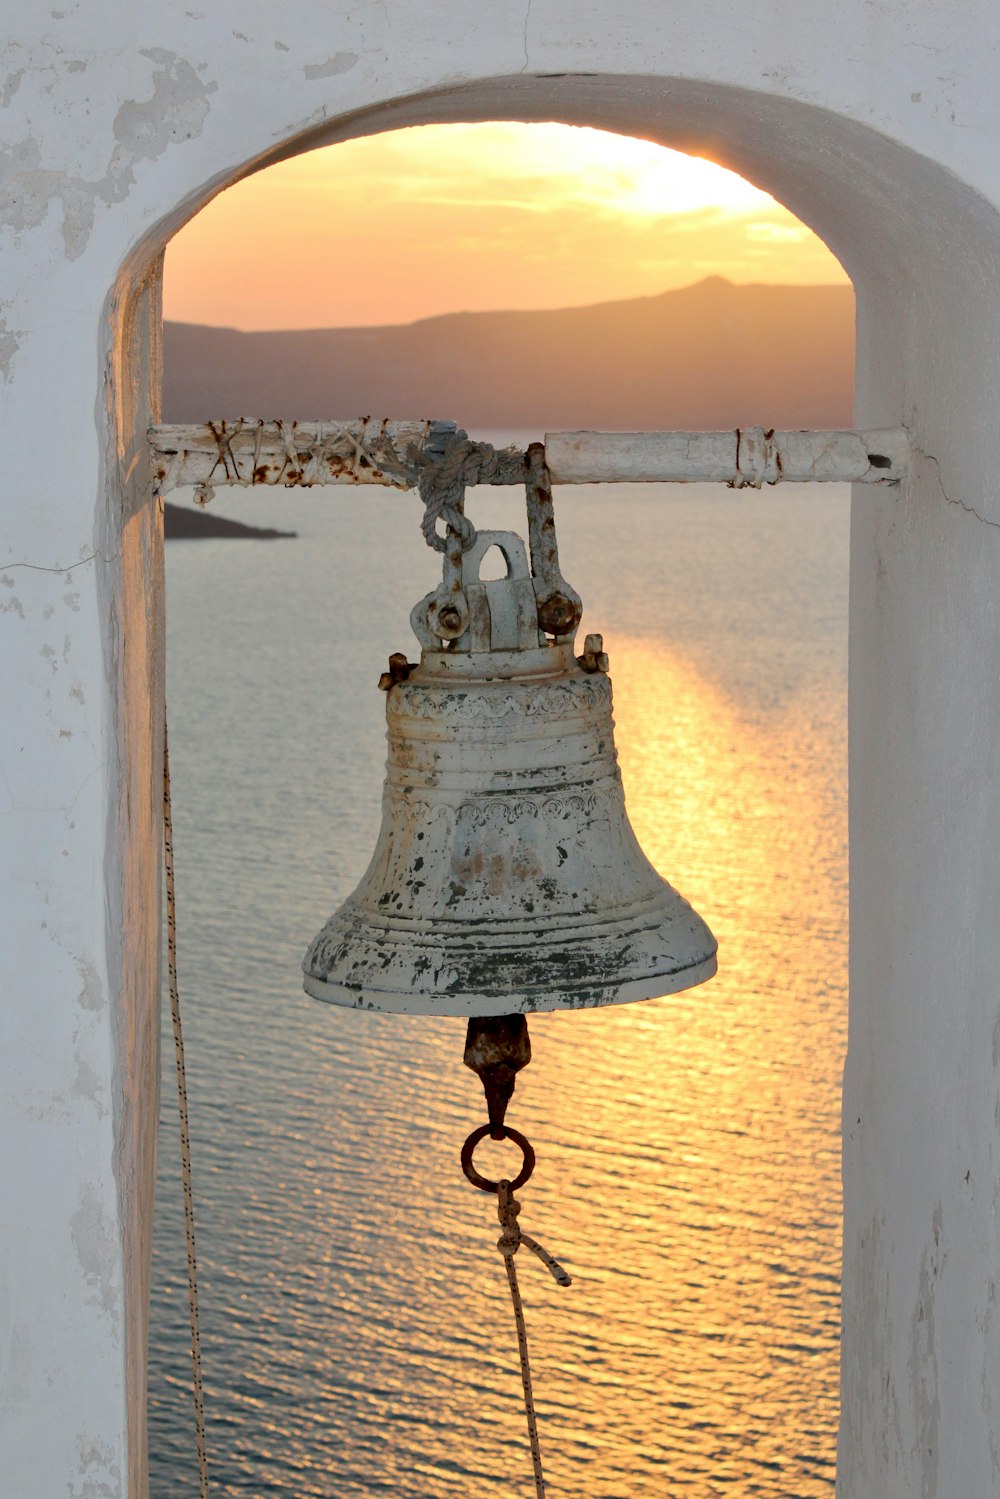 white and black metal bell near body of water